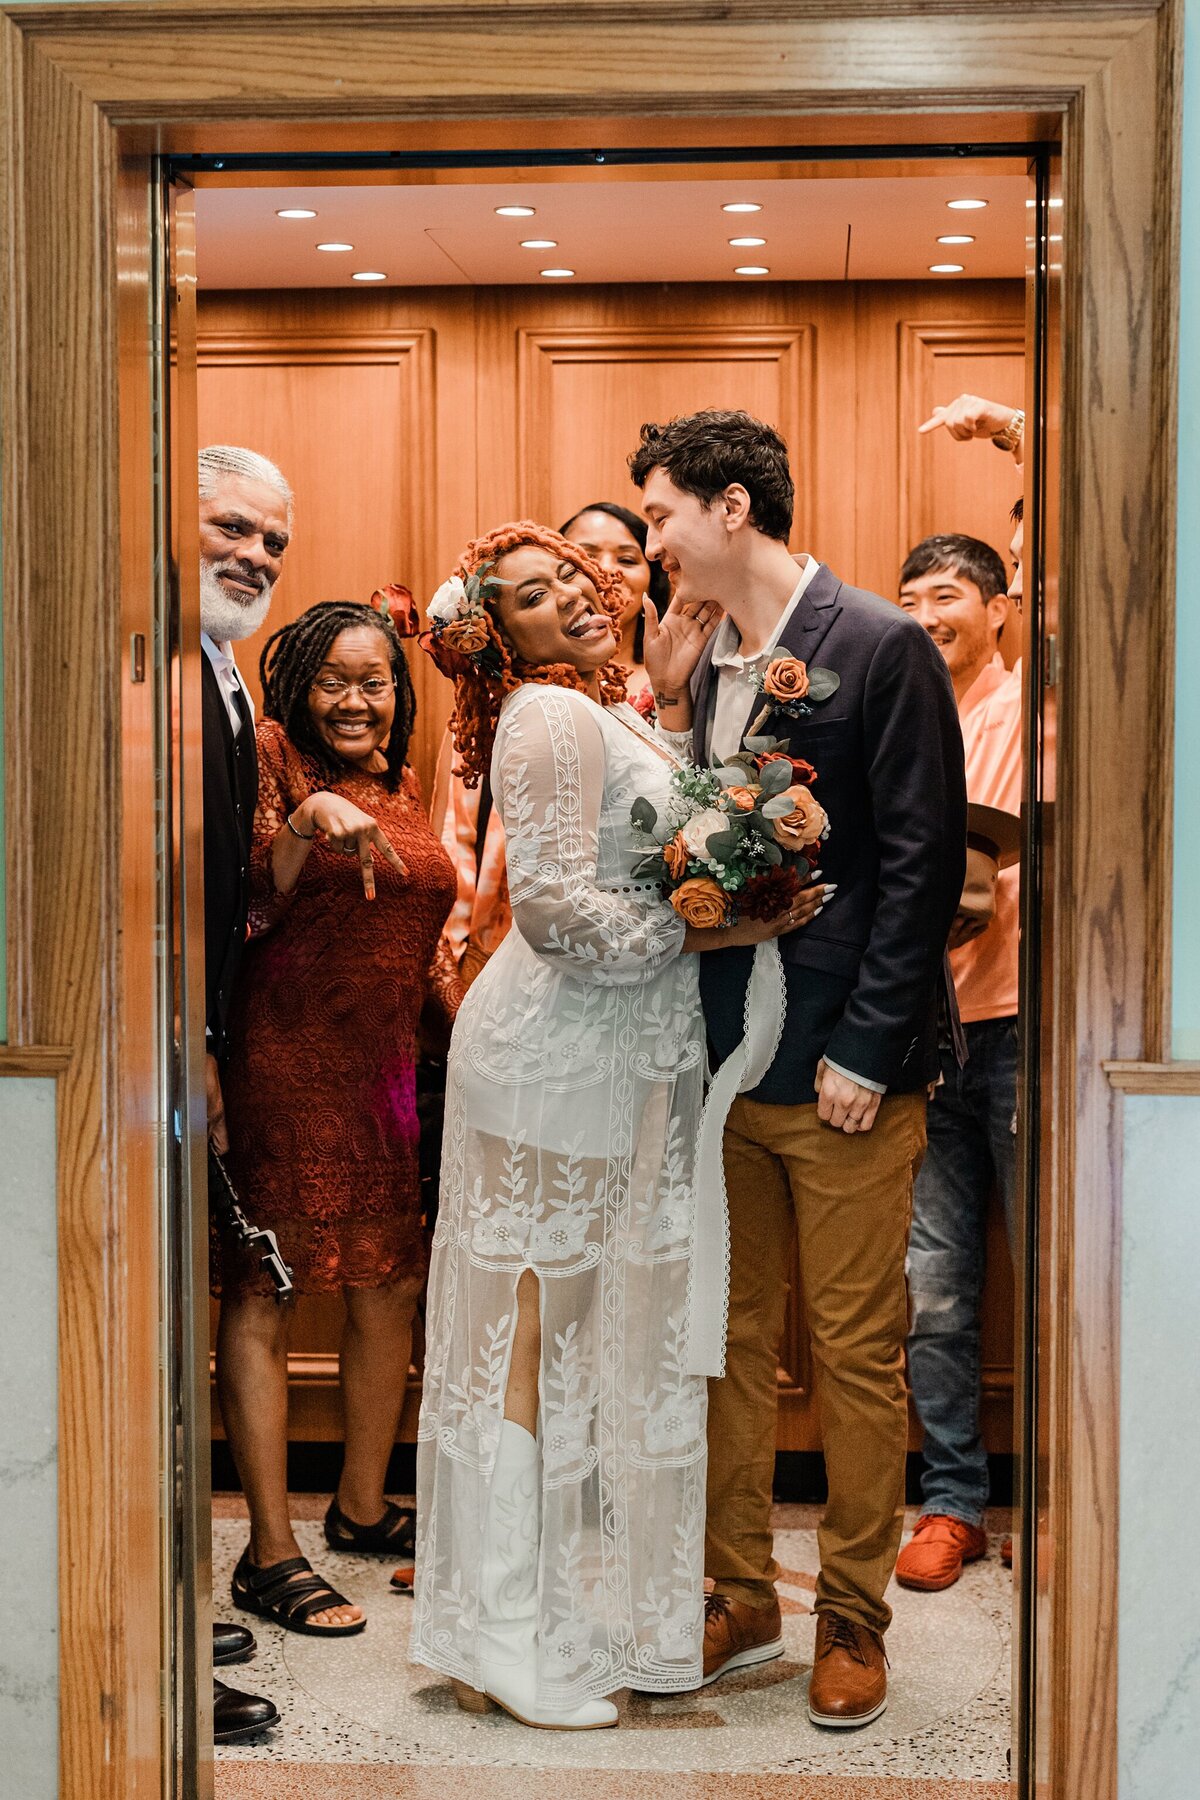 A bride, groom, and their families all playfully posing together on the elevator at the Tarrant County Courthouse in Fort Worth, Texas. The bride is on the left and is wearing an intricately patterned, white dress with white cowboy boots, and a white hair piece. She playfully smiles and sticks out her tongue while holding a bouquet. The groom is on the right and is wearing a dark blue jacket and brown dress pants. He looks like he's about to lean in to kiss the bride on the cheek. Their families form a semicircle around them, and they are all laughing, joking, and celebrating.